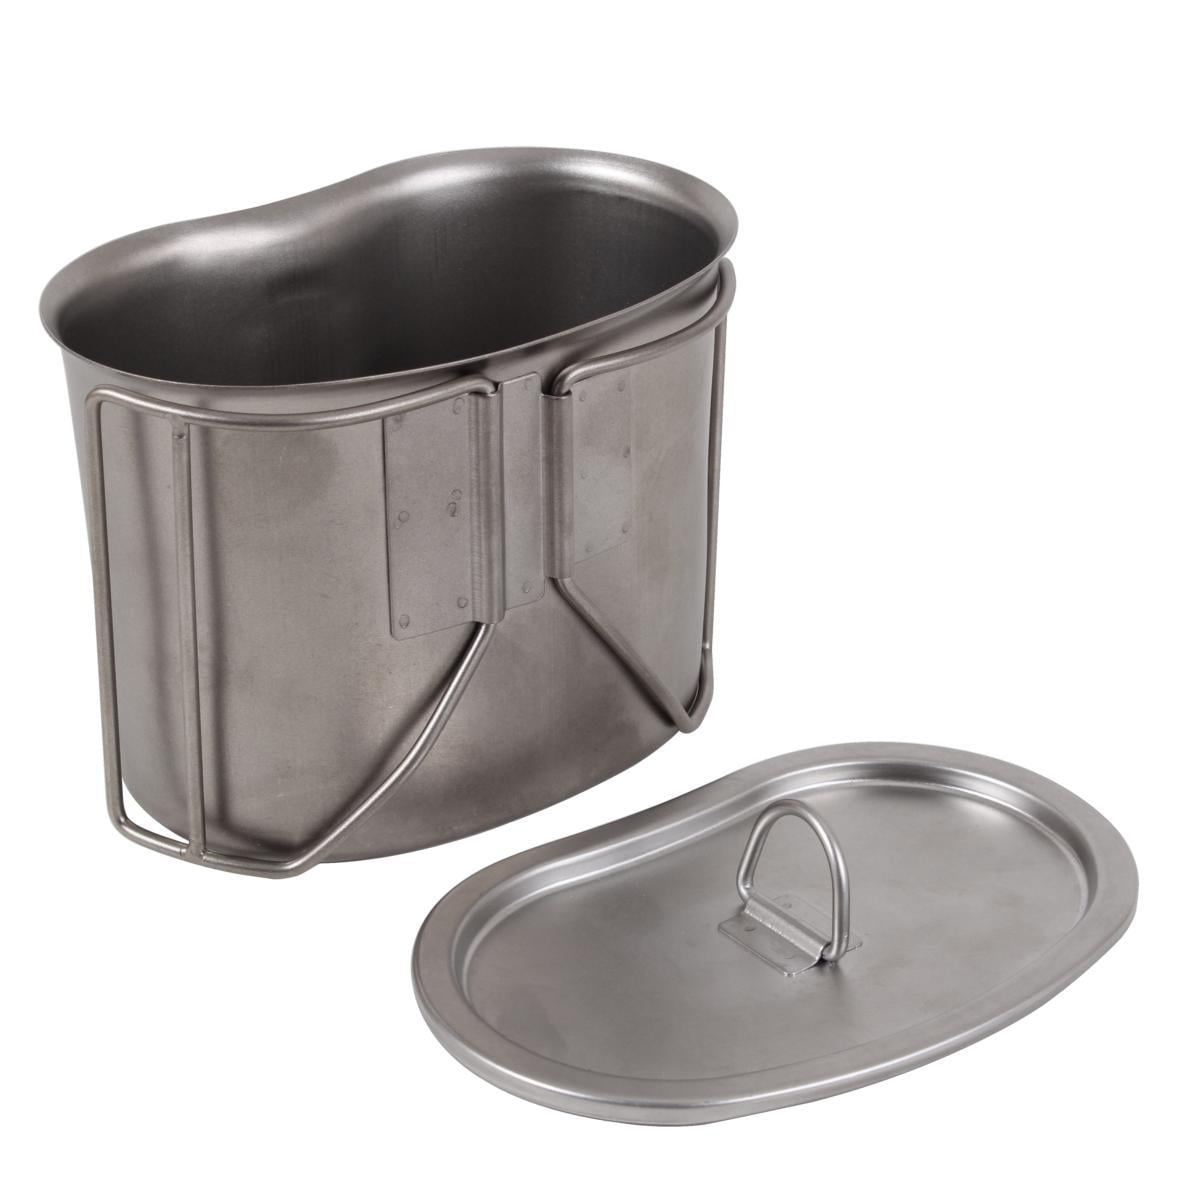 Type HEAVY DUTY Stainless Steel Canteen Cup with Lid Military New G.I 